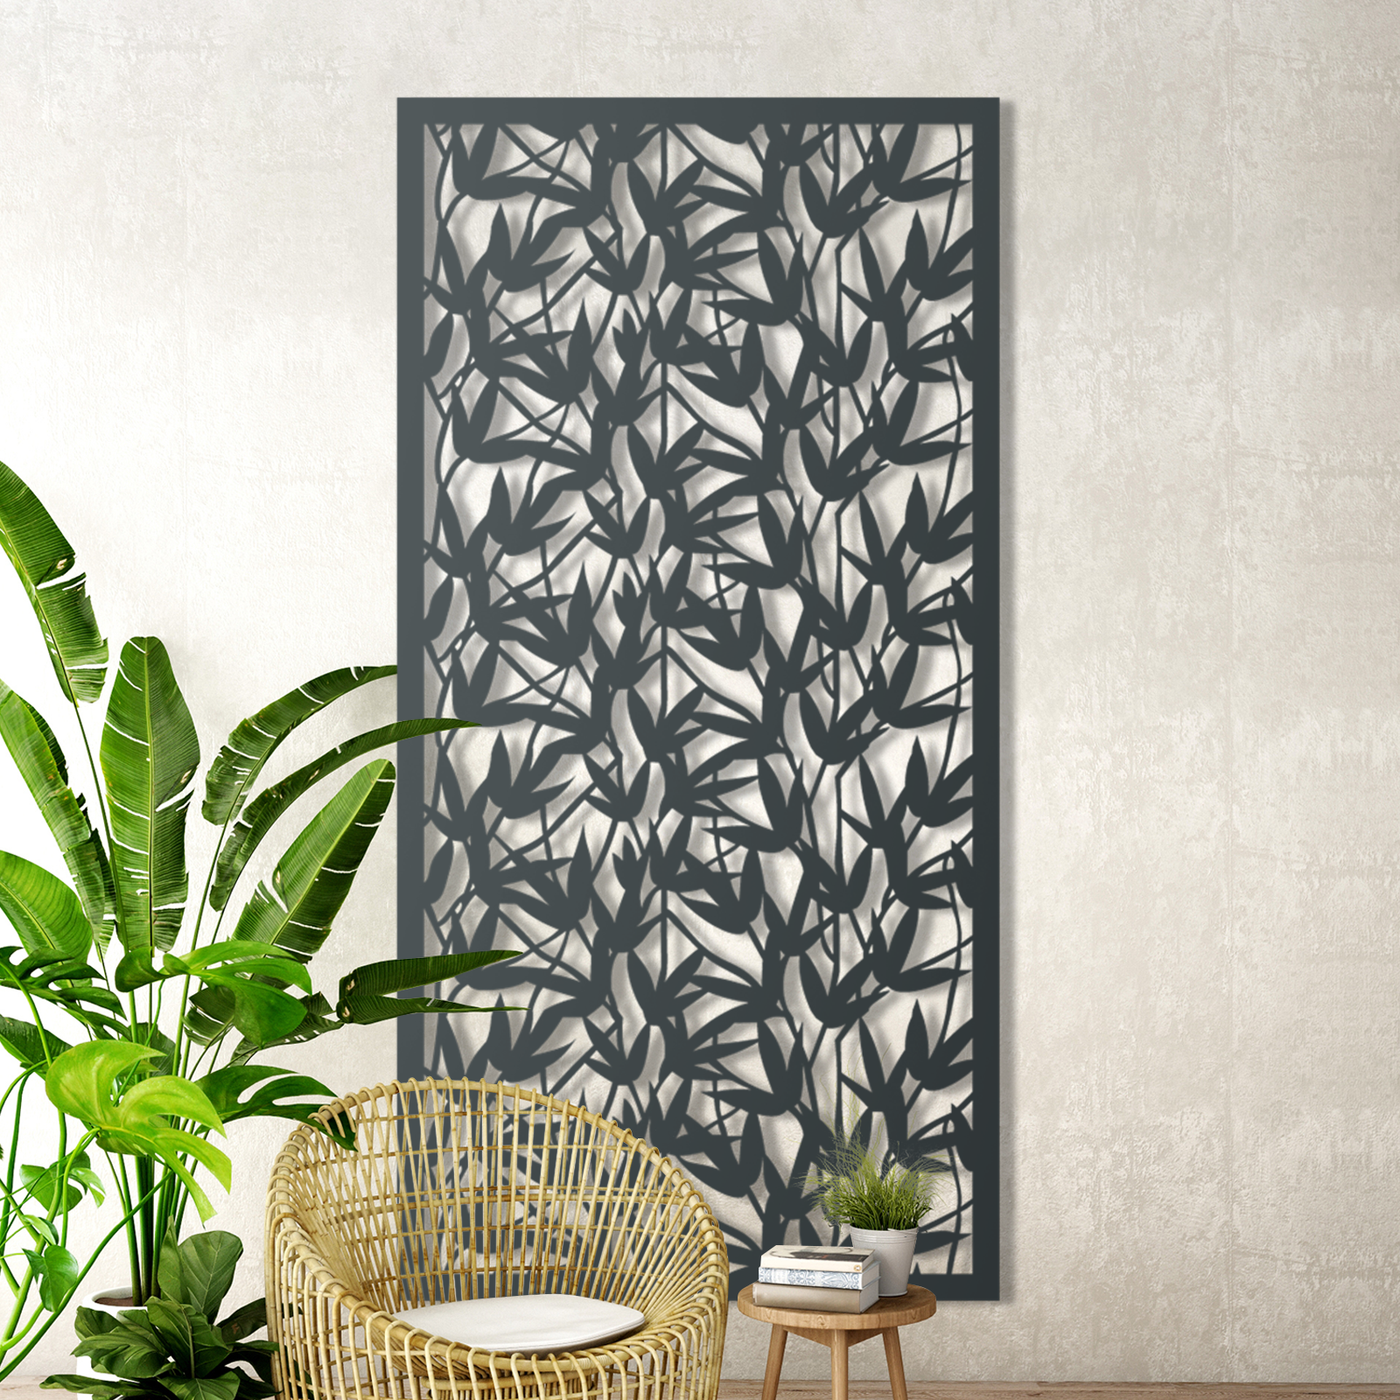 Undergrowth Metal Screen: Add a Touch of Style to Your Garden